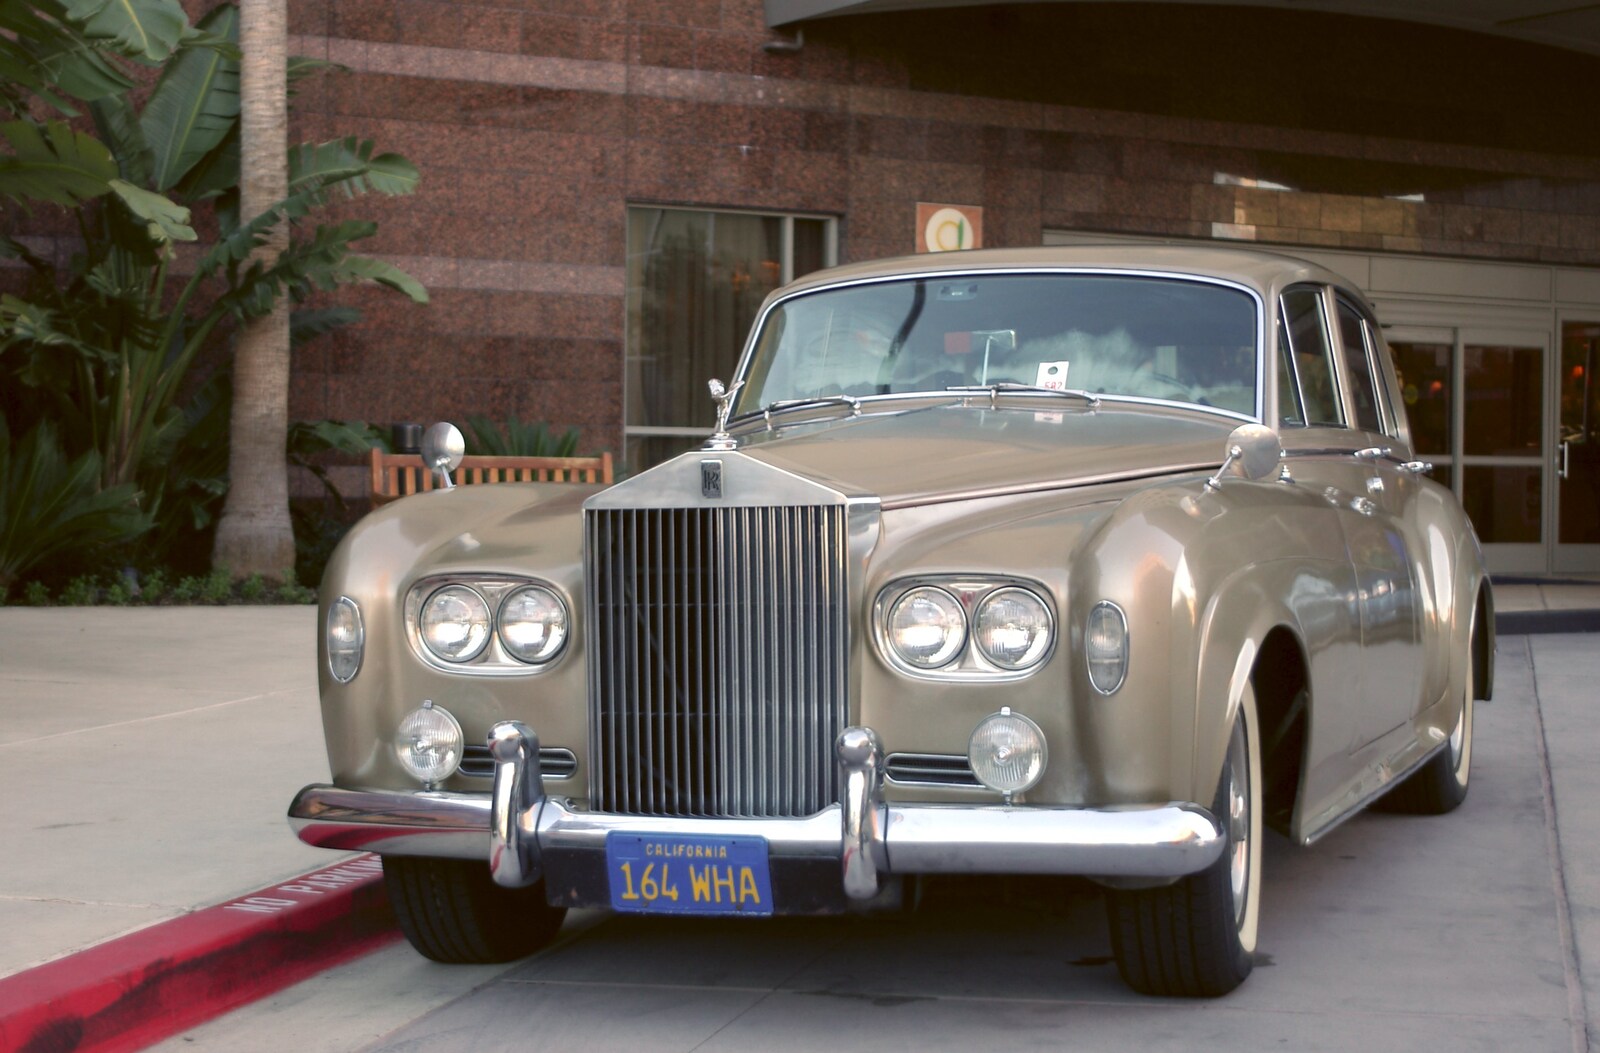 A Trip to San Diego, California, USA - 11th January 2005: There's a fancy Rolls-Royce outside the hotel